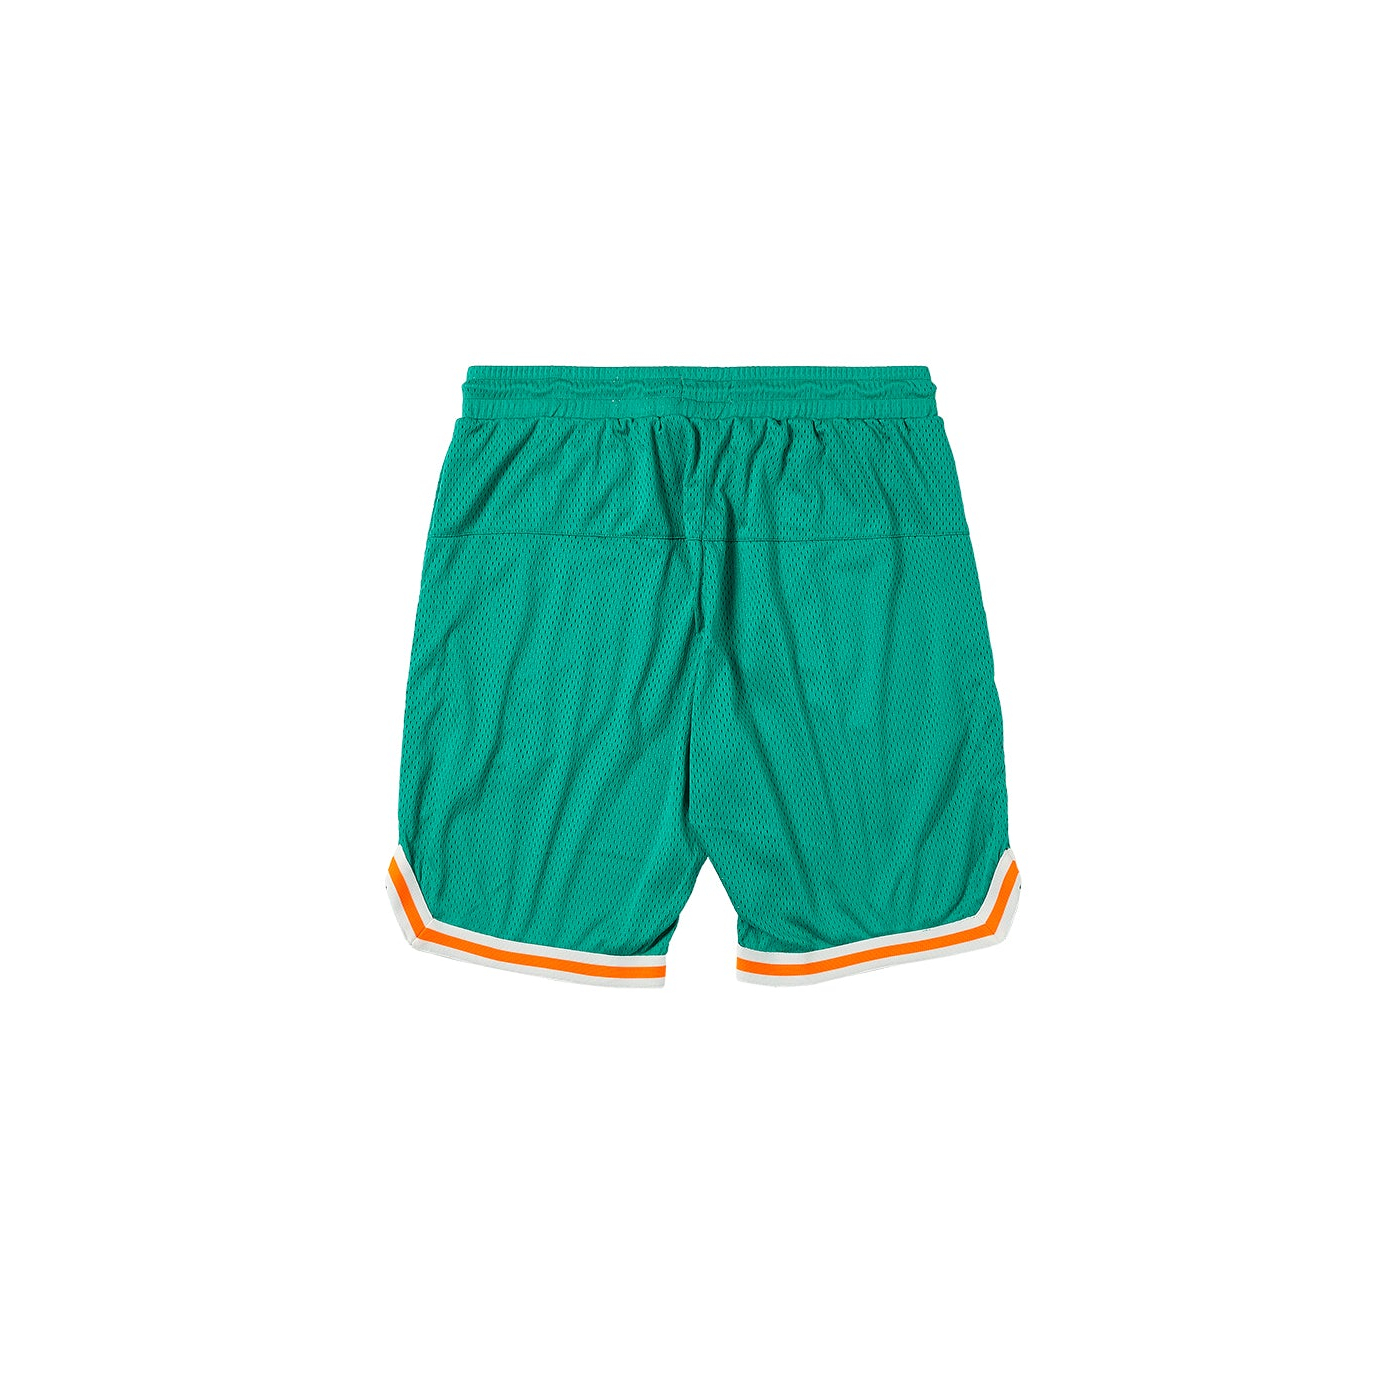 Thumbnail HESH ATHLETIC SHORT TURQUOISE one color